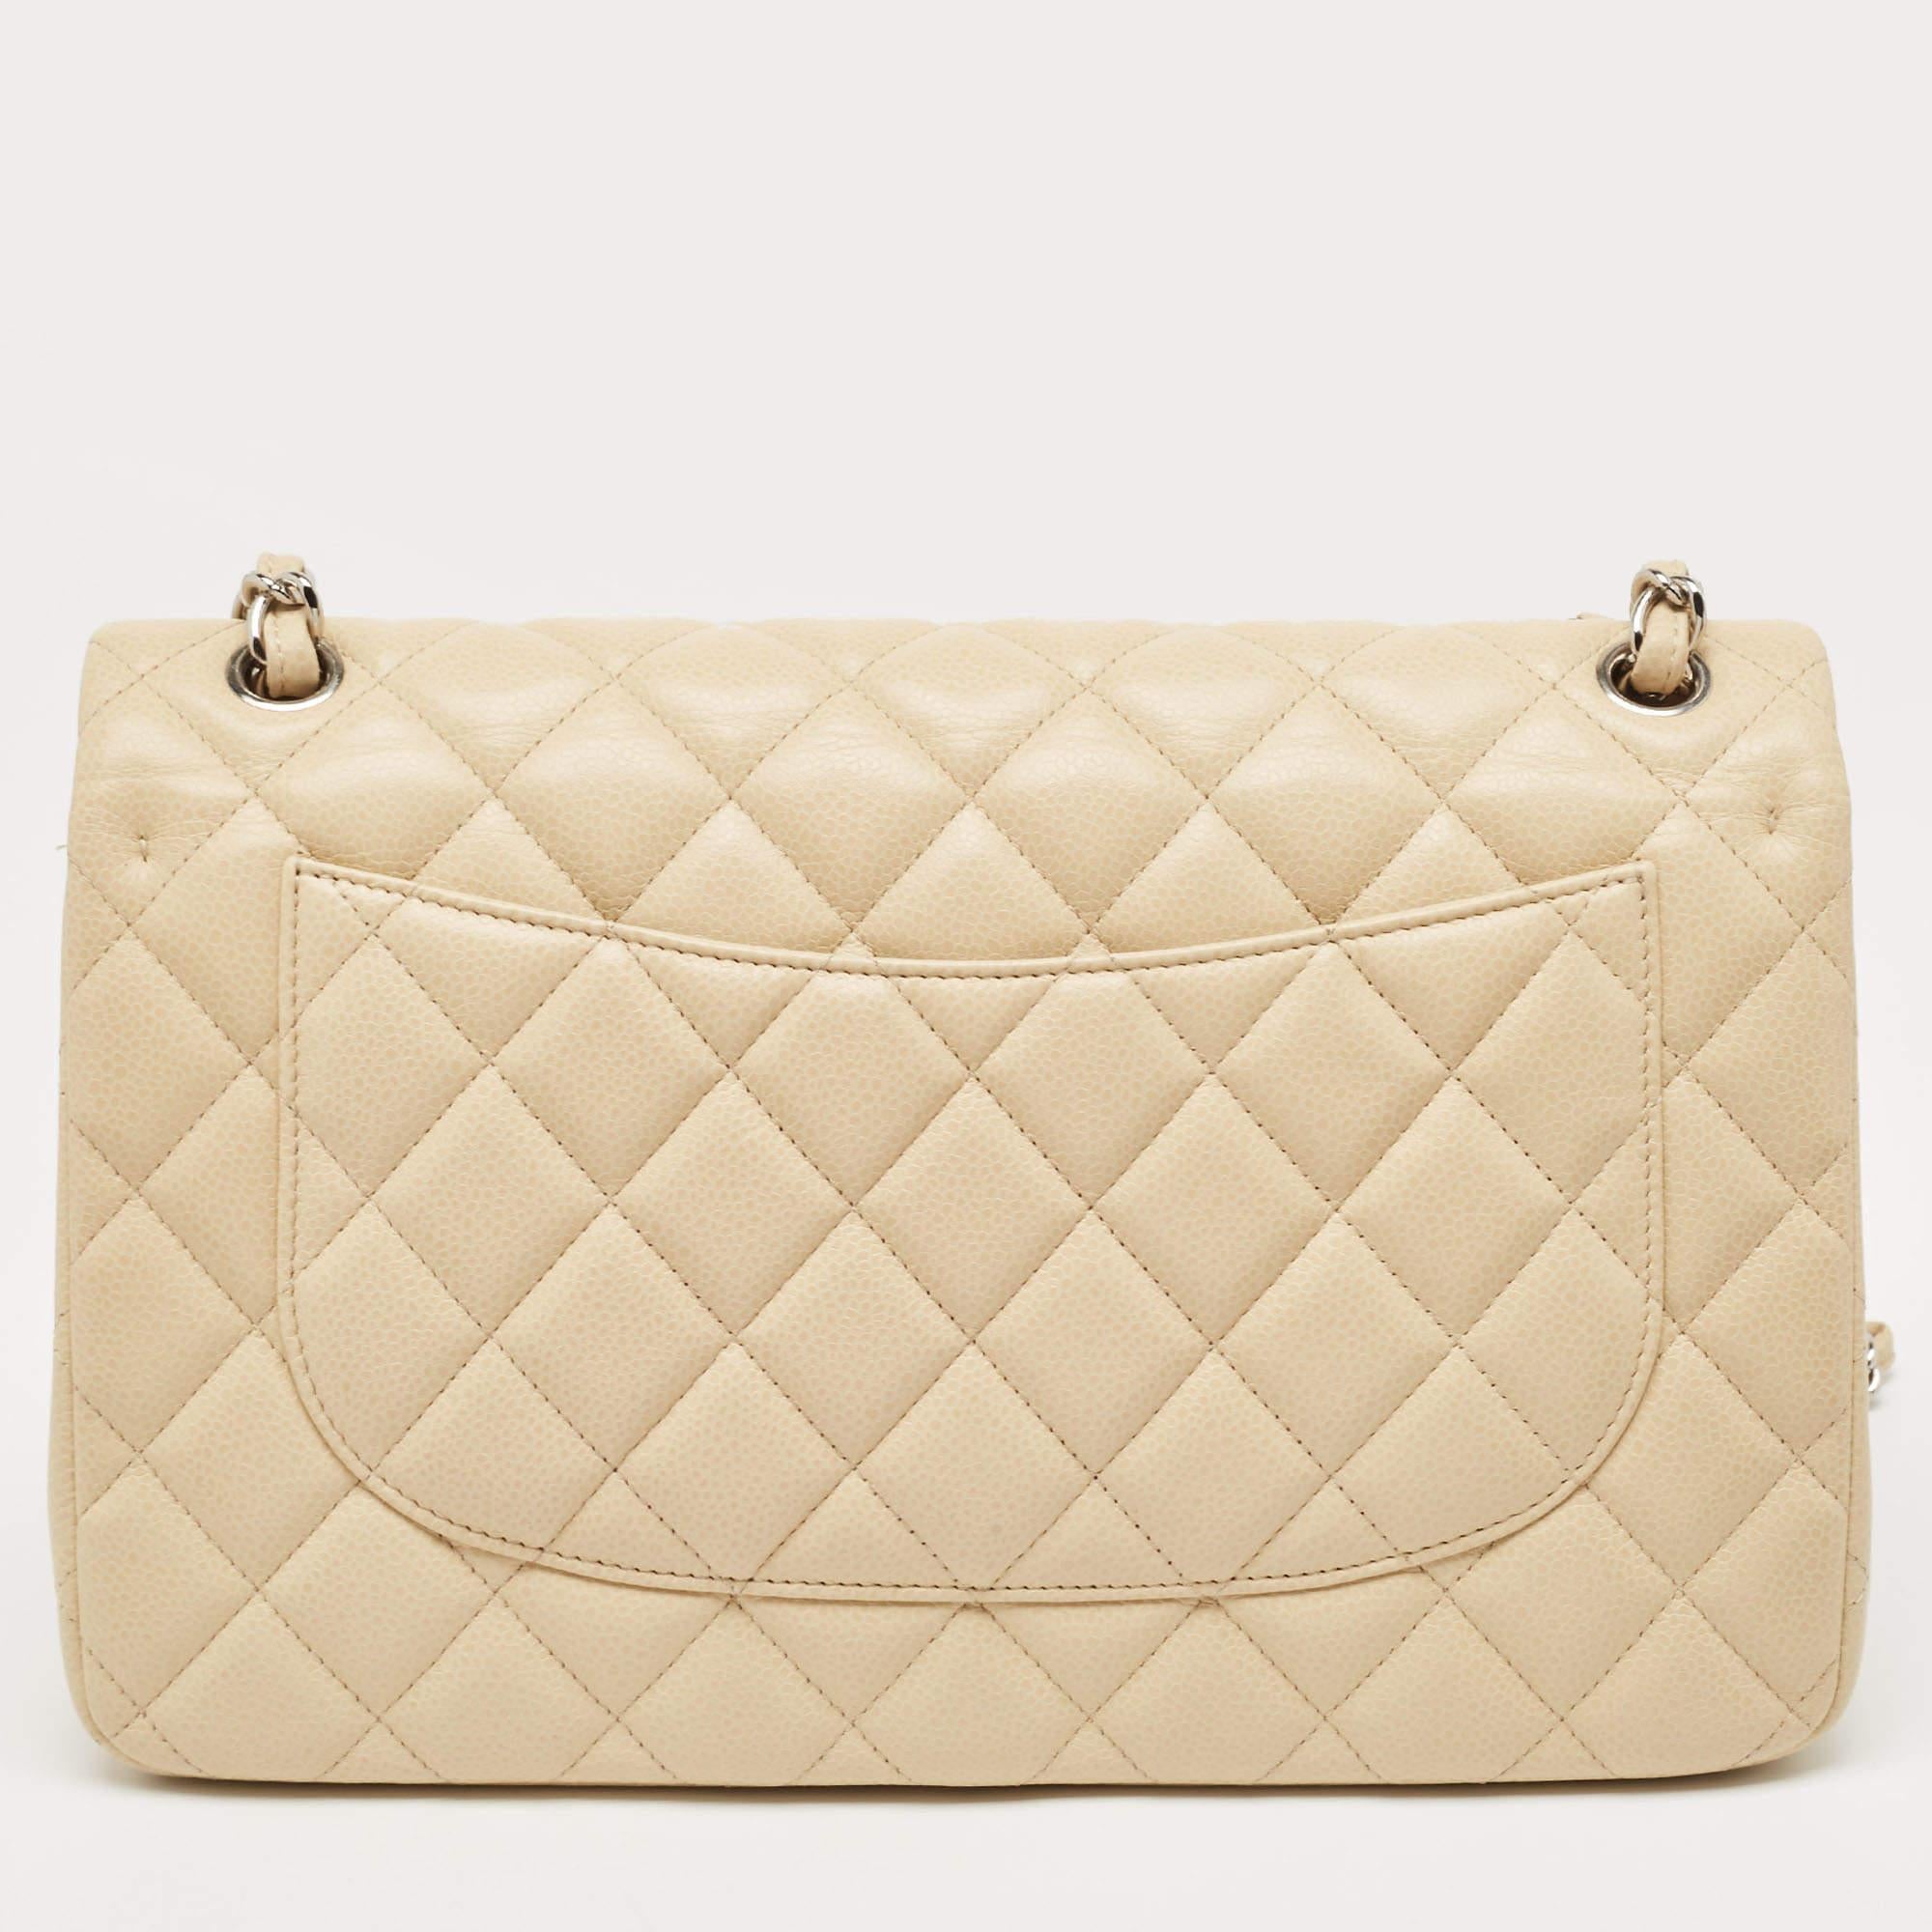 Chanel's luxurious Classic Flap bag is a must-have in a well-curated wardrobe! This stunning bag has a masterfully crafted leather exterior with silver-tone hardware and the iconic CC logo on the front. This Classic Jumbo Classic Double Flap is